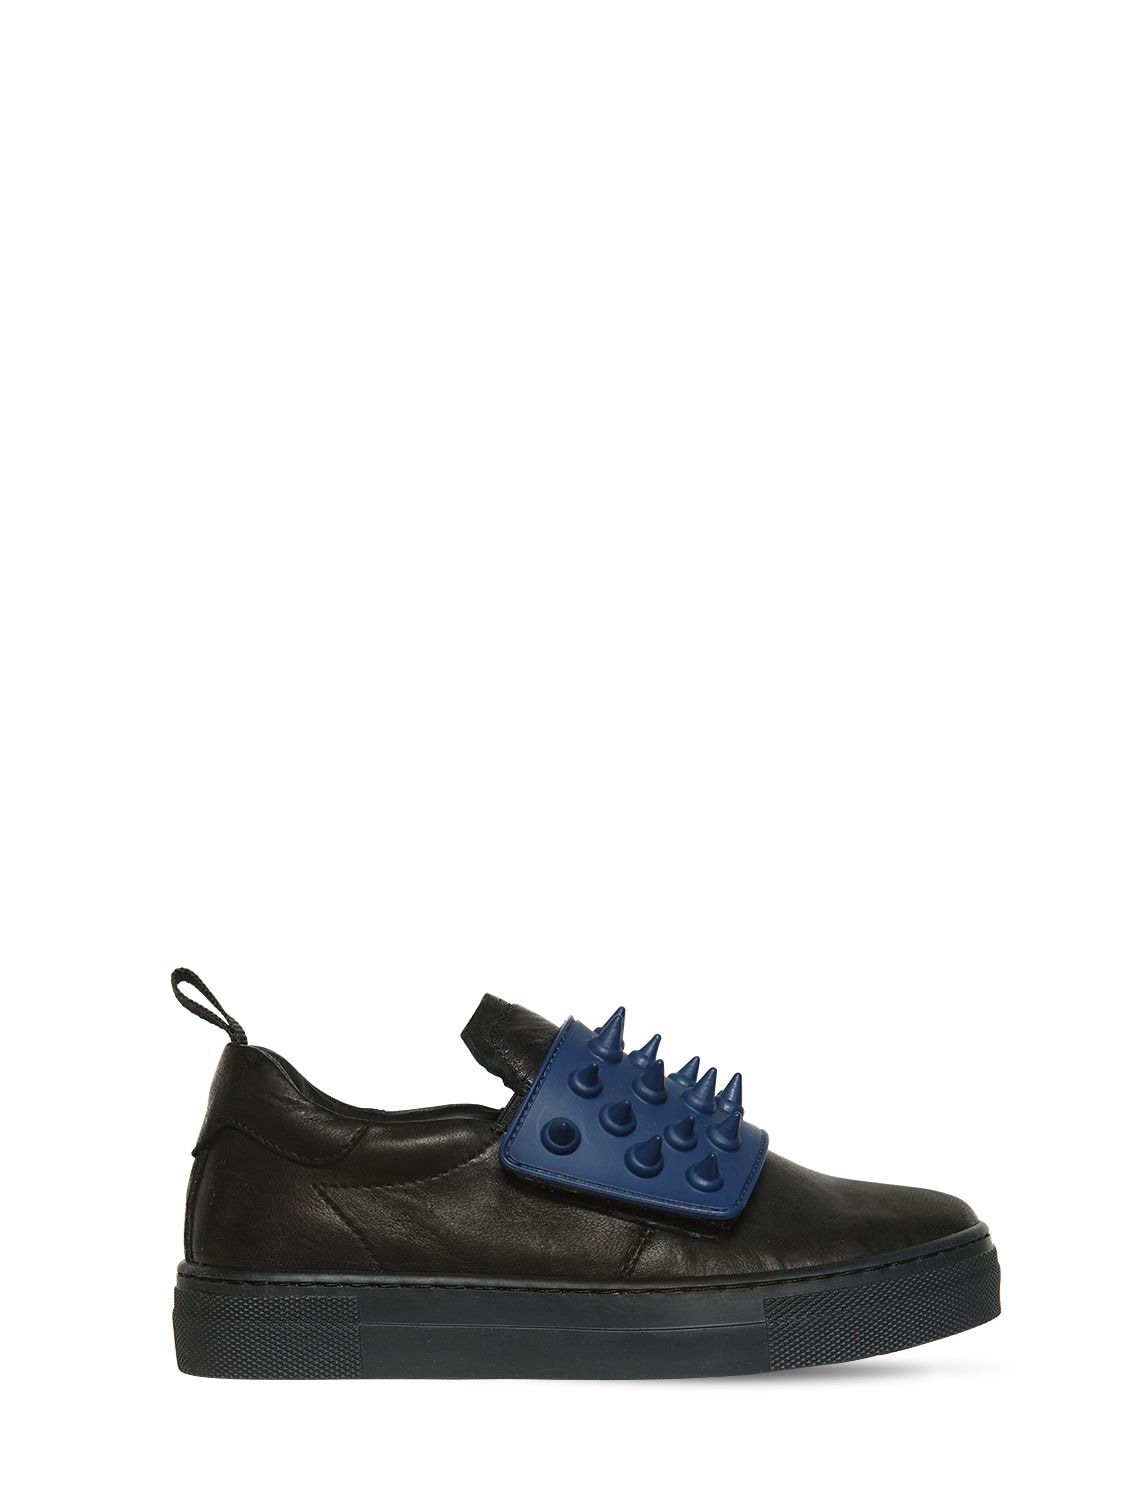 Am 66 Kids' Spiked Leather Slip-on Sneakers In Black,navy